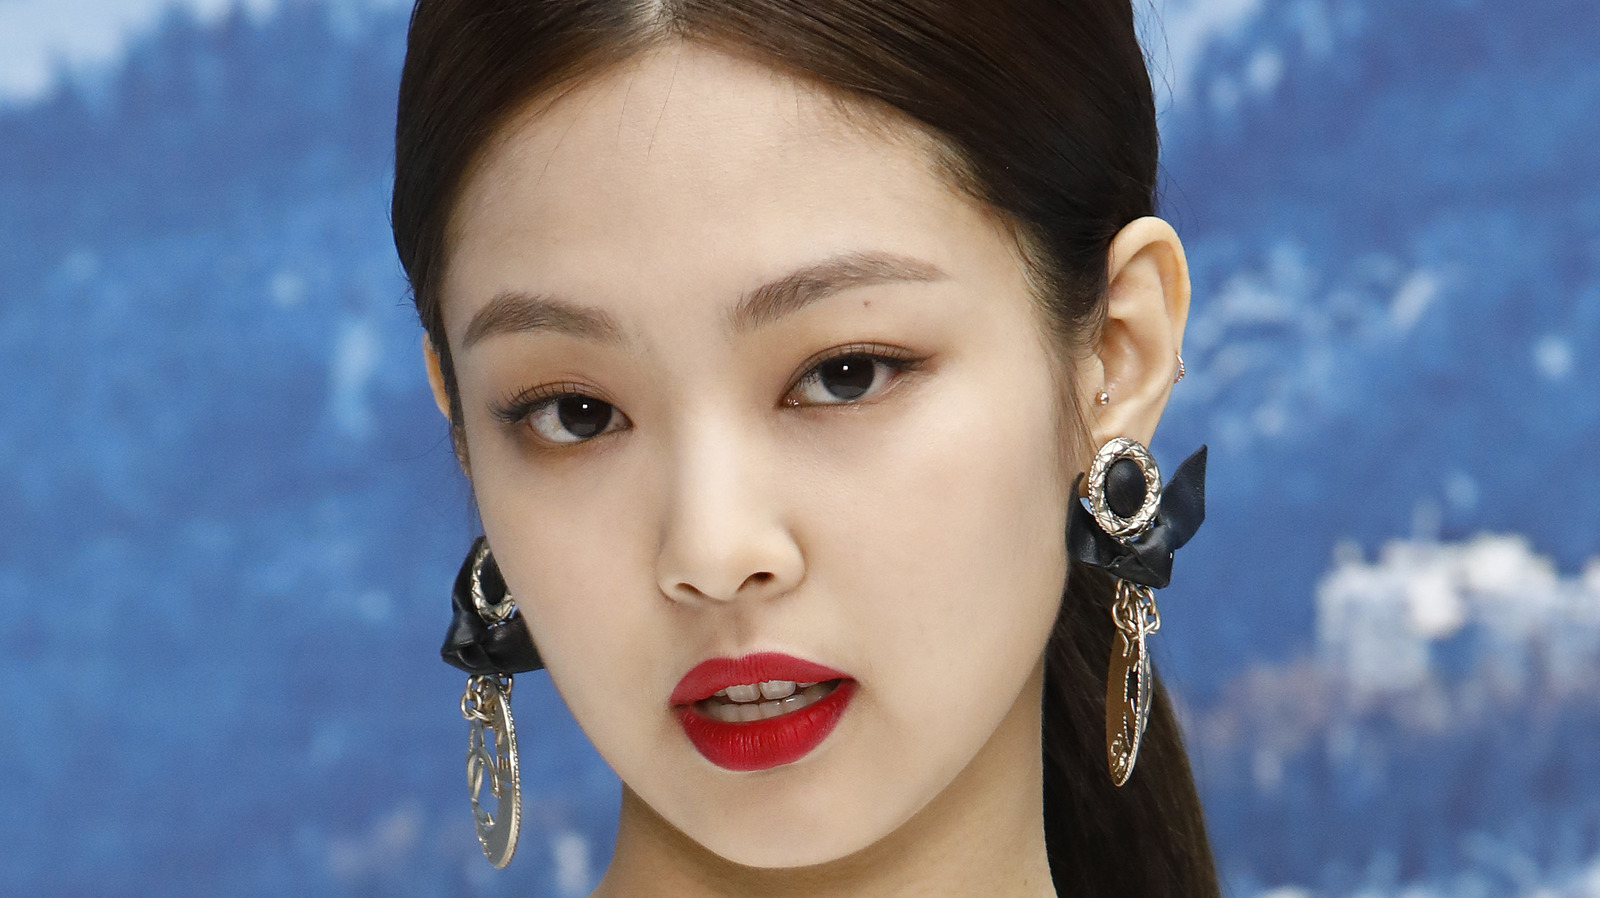 Dragon jennie dating g and How is